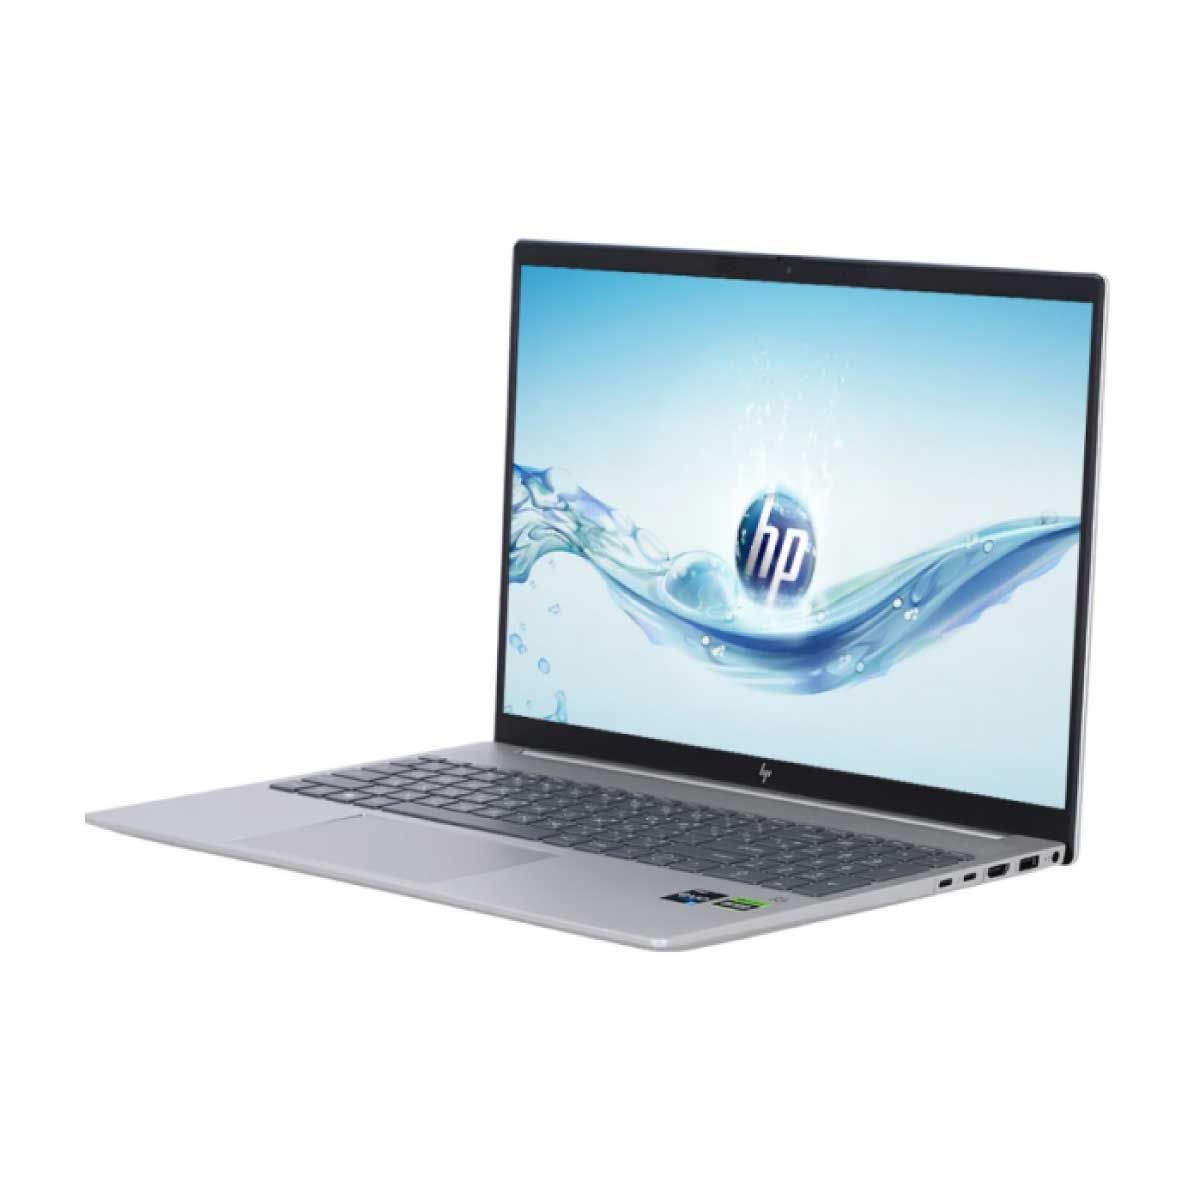 NOTEBOOK (โน้ตบุ๊ค) HP Pavilion 16-AG0011AU (NATURAL SILVER)